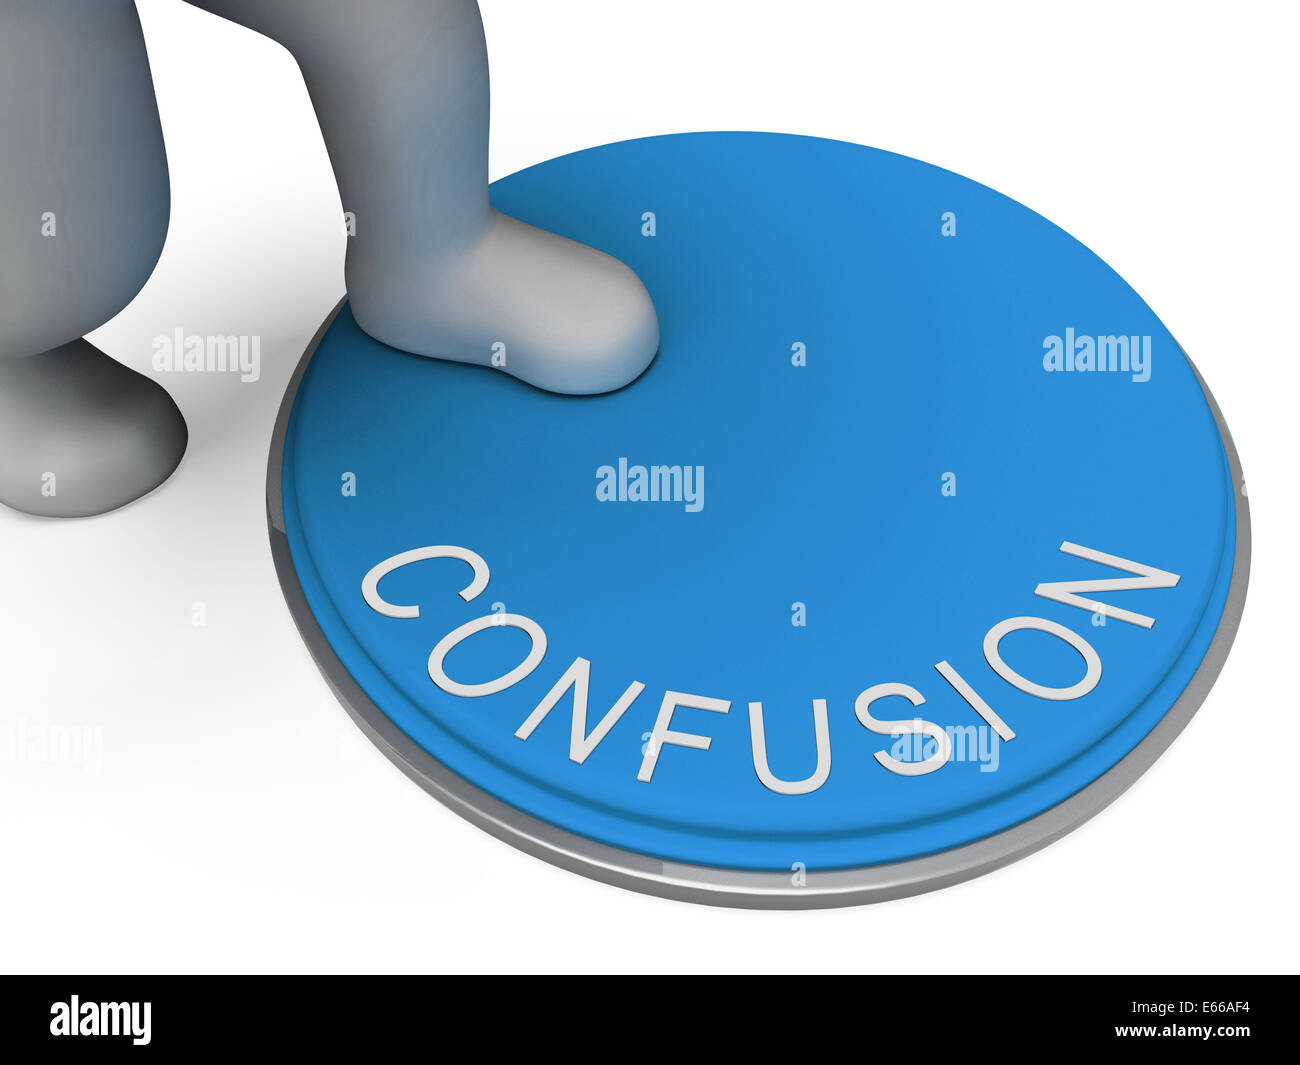 Confusion Button Showing Muddle Unclear And Unsure Stock Photo